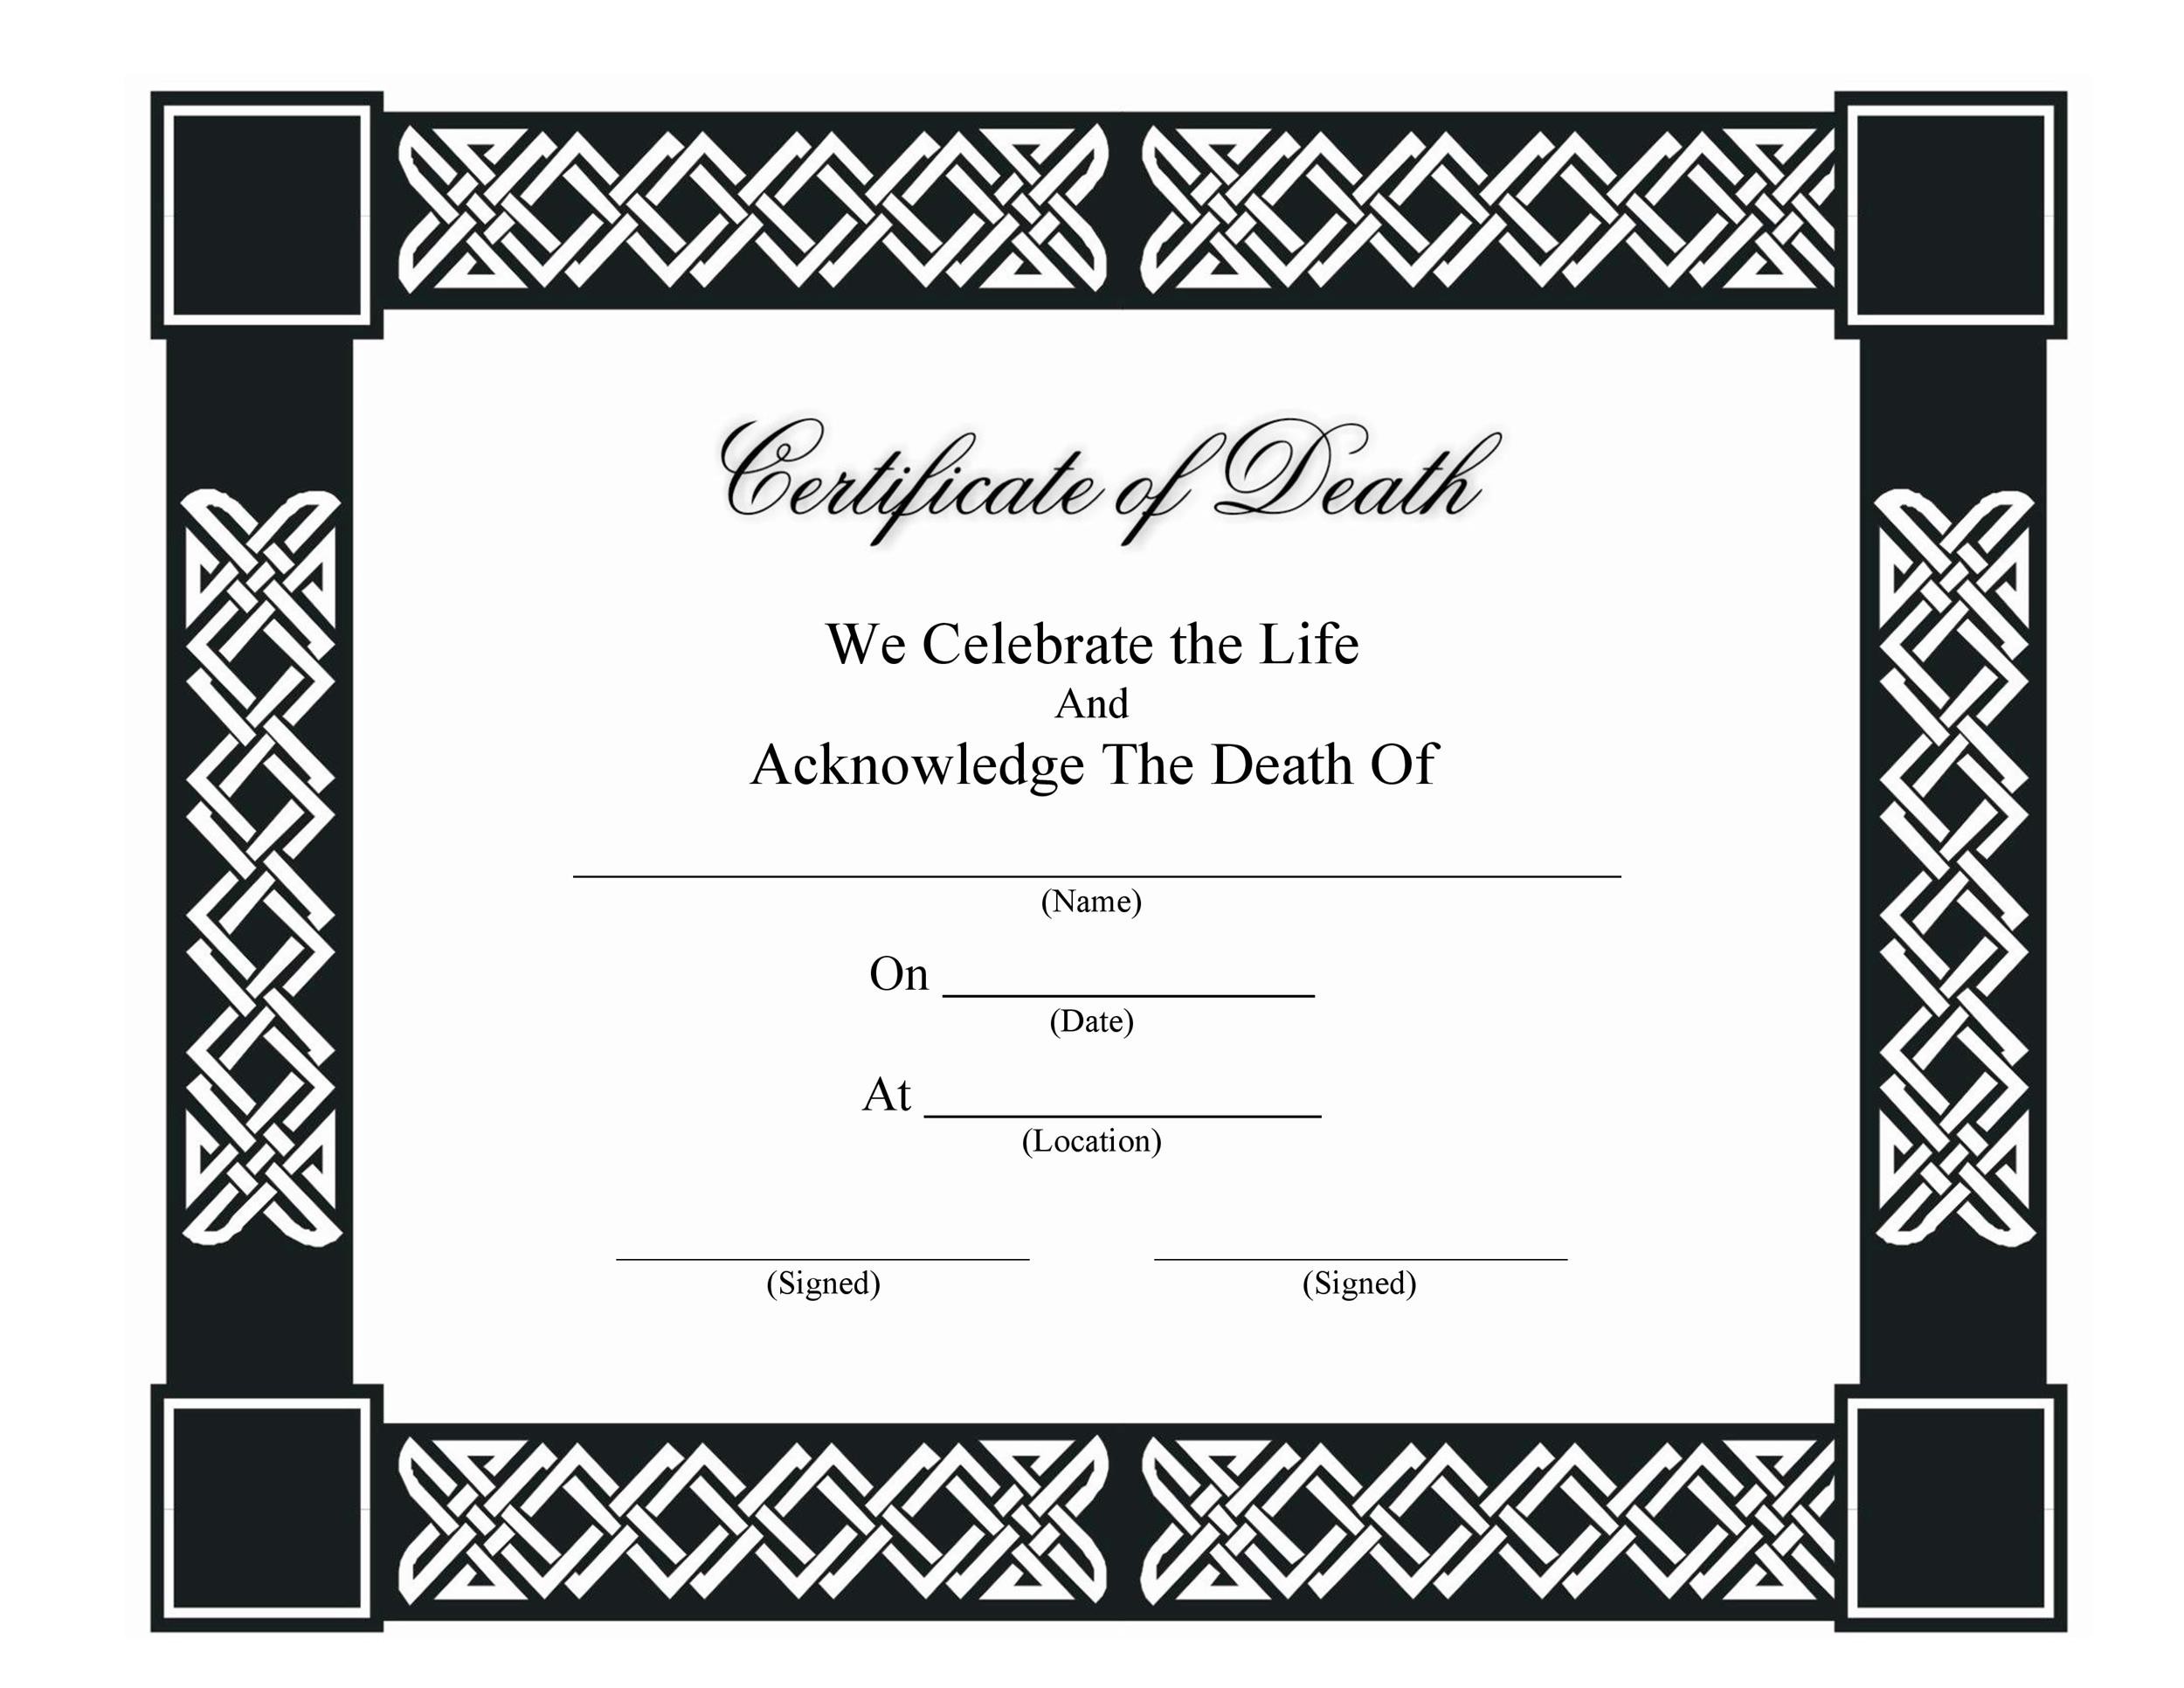 death-certificate-sample-pakistan-archives-best-marriage-pertaining-to